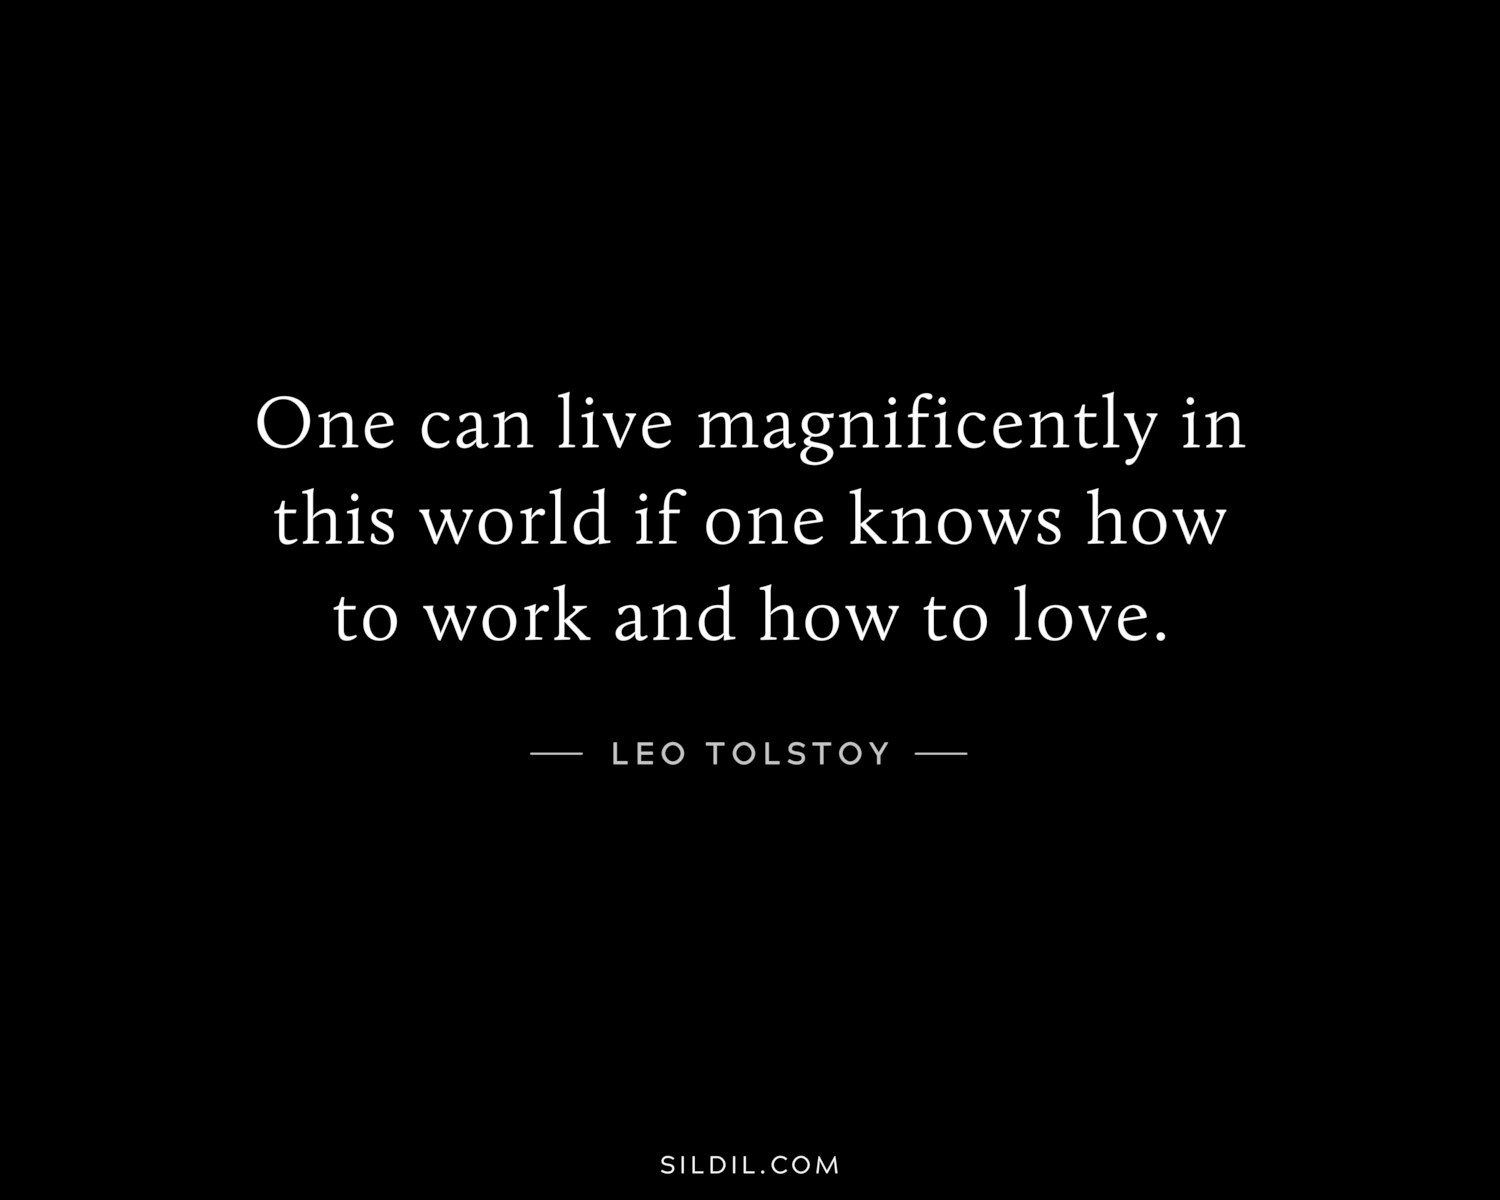 One can live magnificently in this world if one knows how to work and how to love.